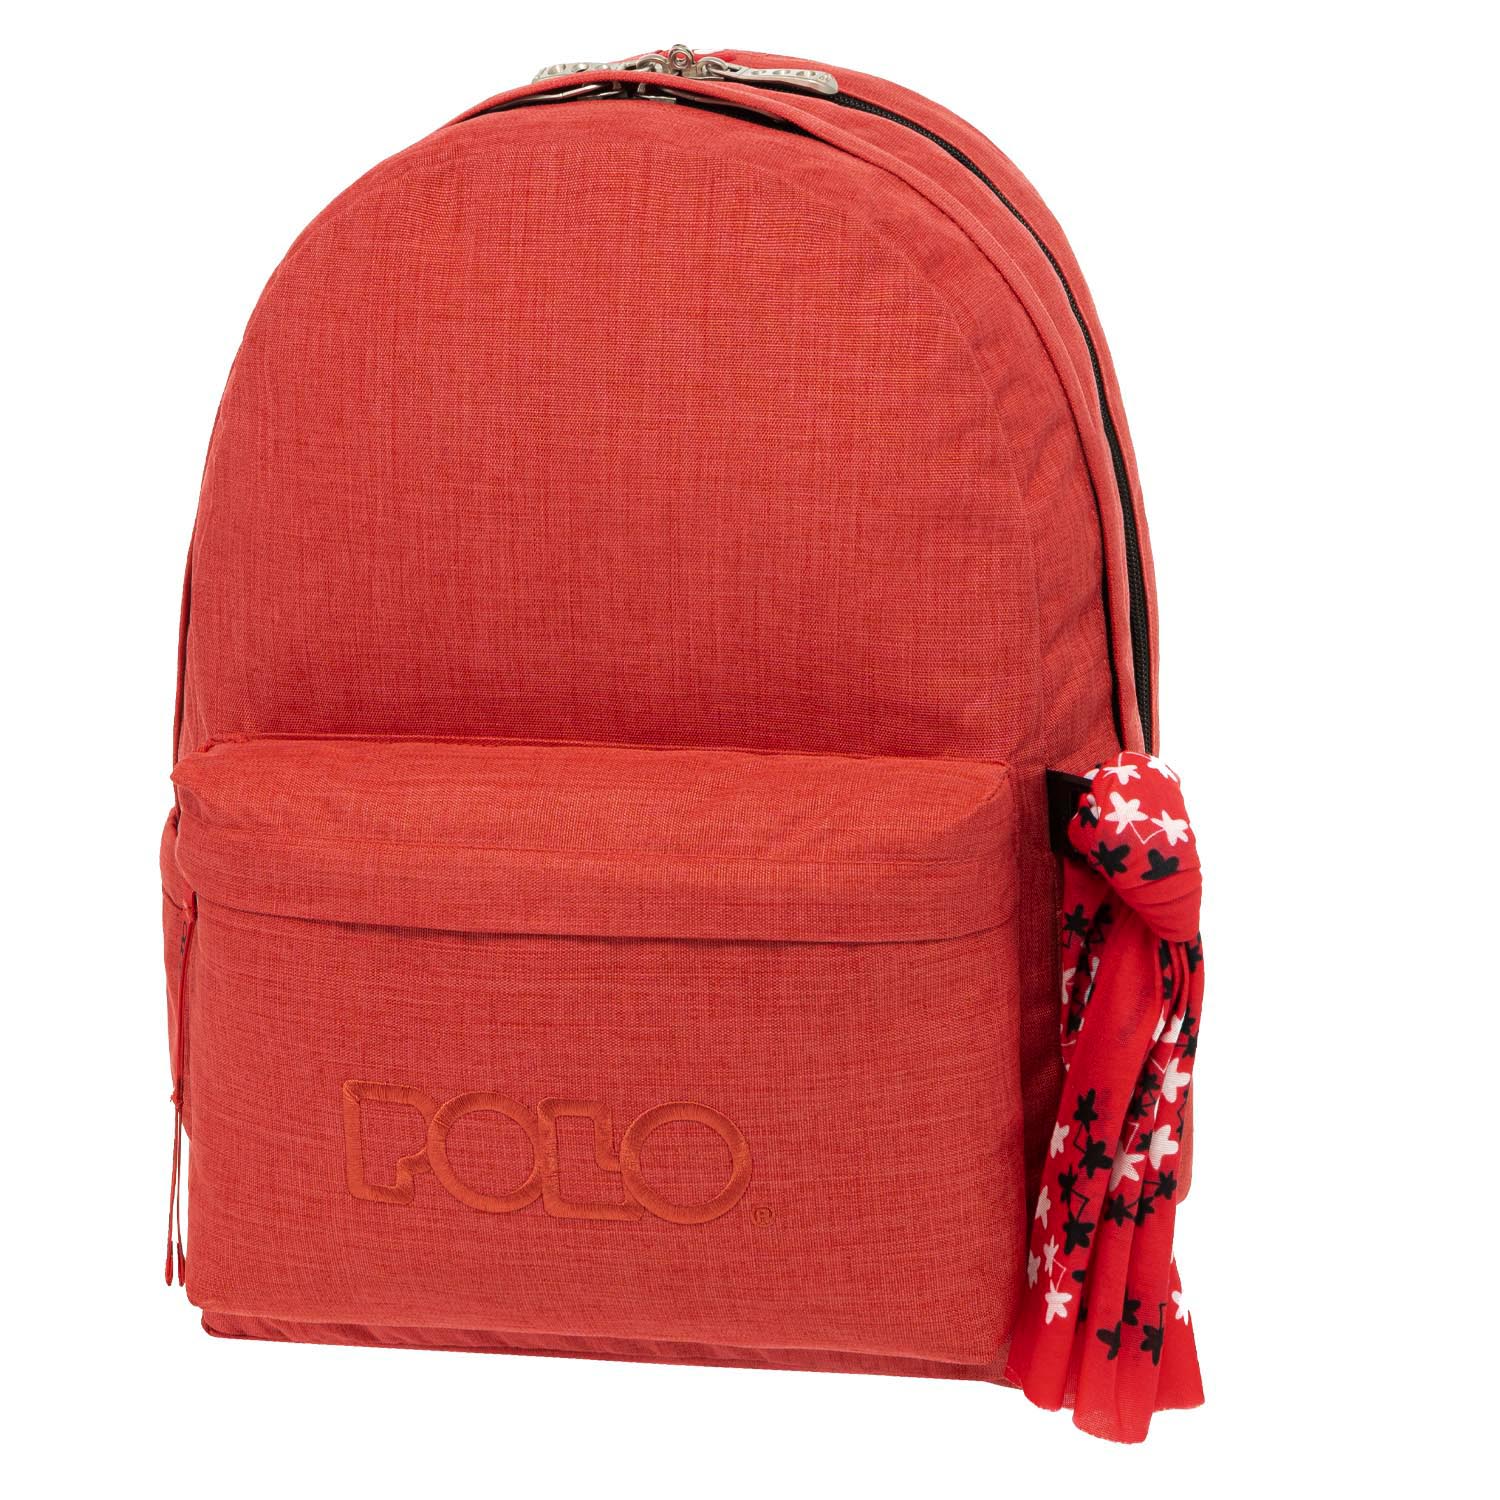 POLO BACKPACK ORIGINAL DOUBLE SCARF (P.R.C.) 2022 CORAL